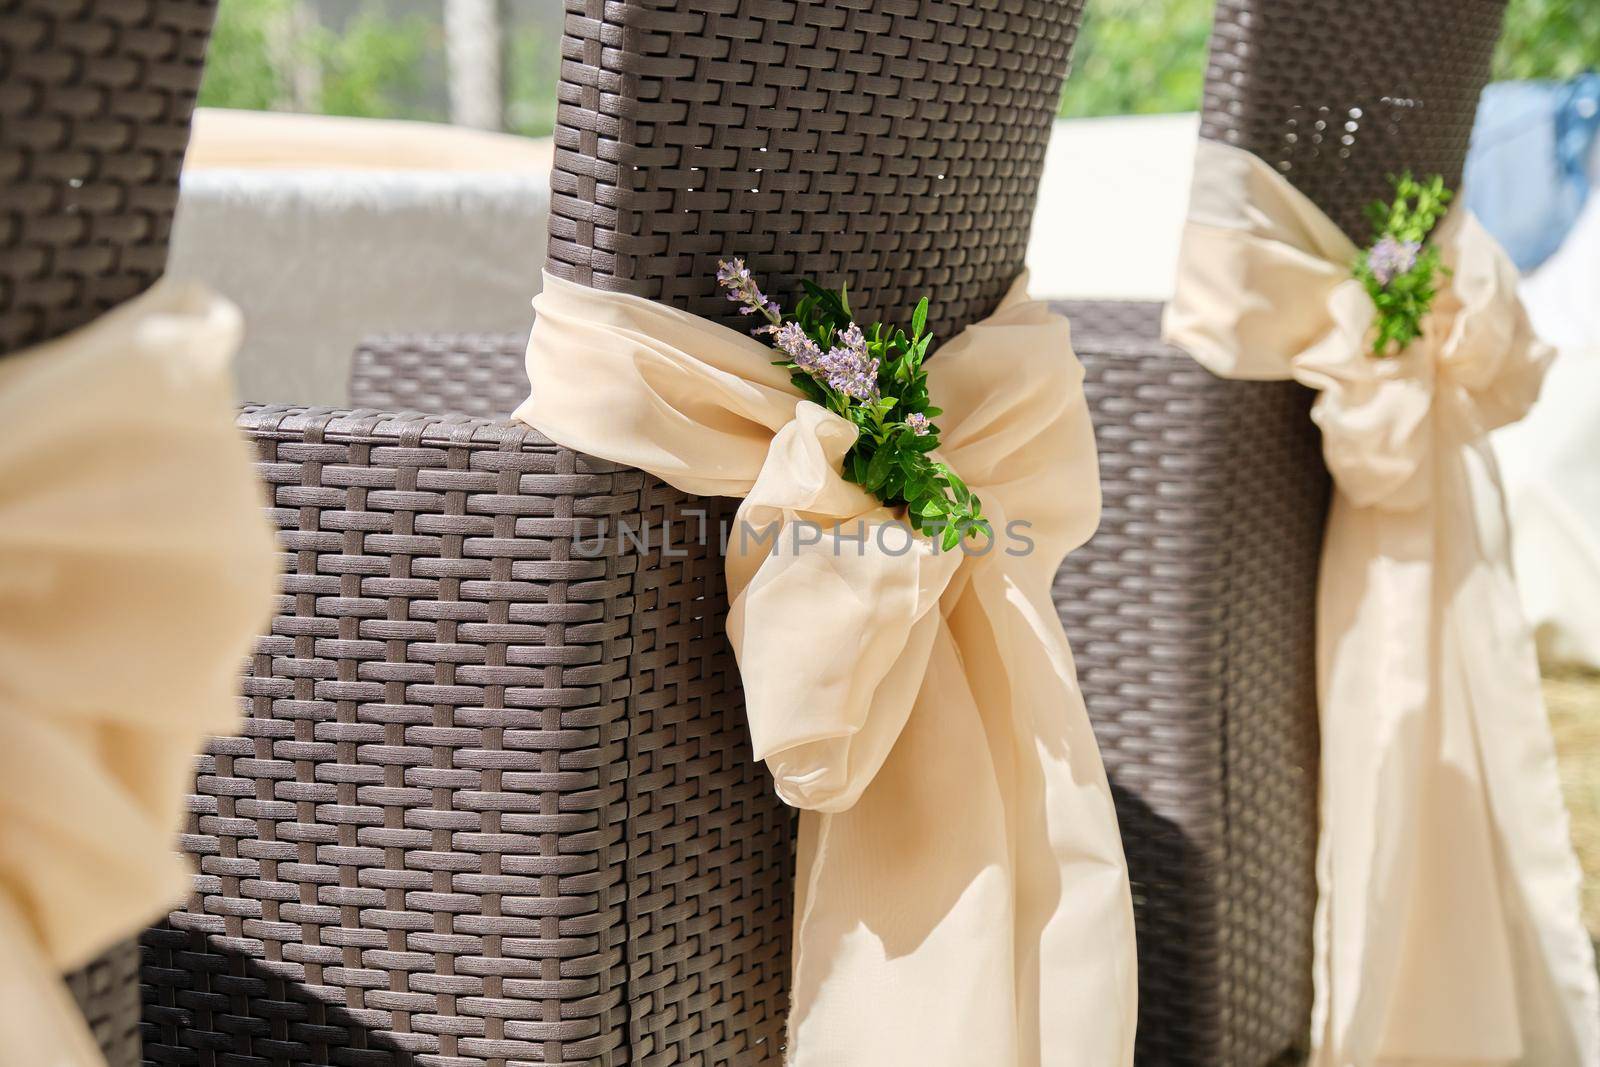 Close-up of rattan garden chairs decorated with textiles with flowers for a party, ceremony.